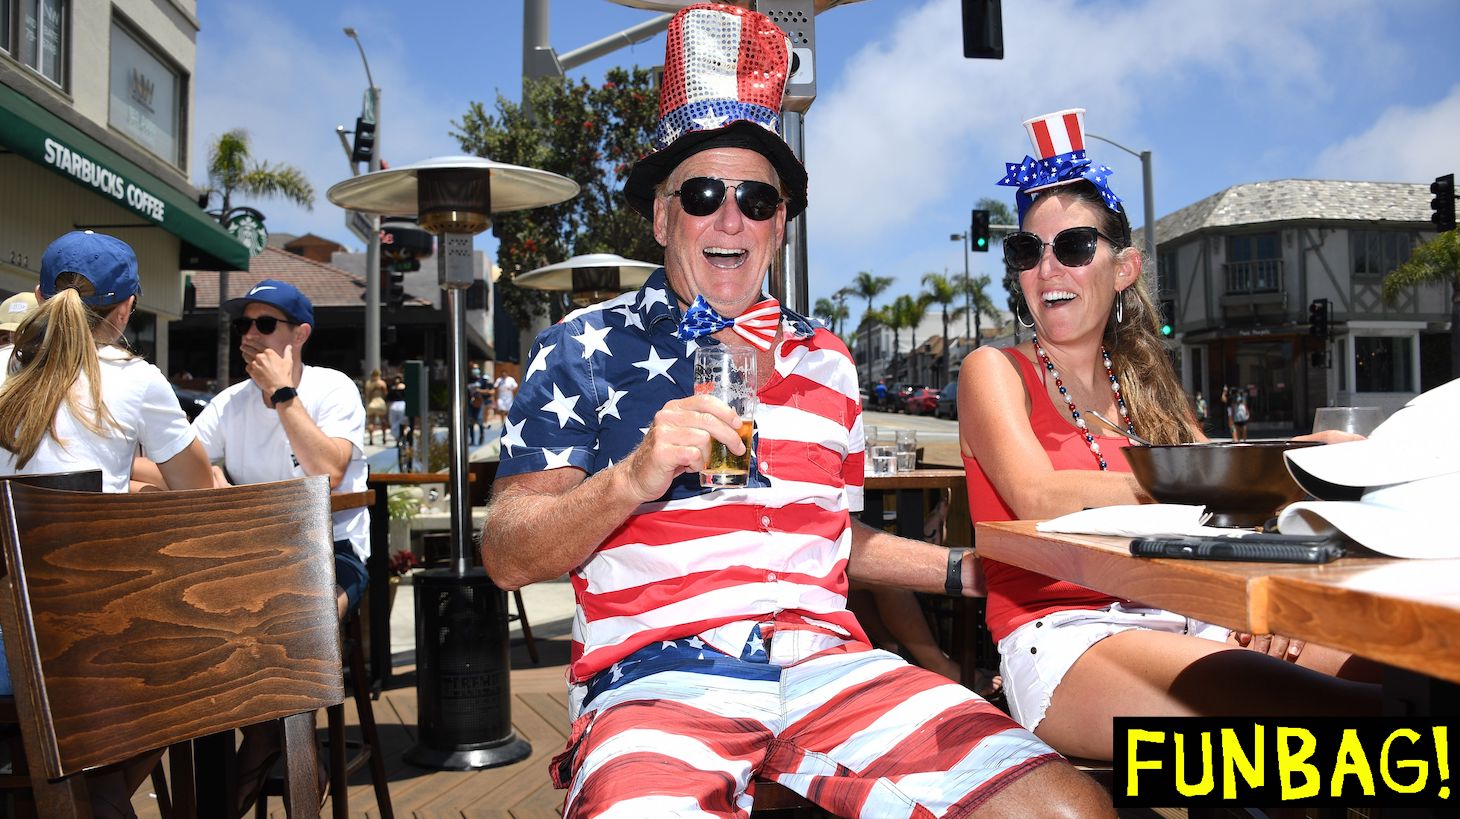 TOPSHOT - Dave Barnes enjoys a holiday lunch with his wife Christy Barnes at an outdoor restaurant in Manhattan Beach, California where beaches are closed due to a spike in COVID-19 in Los Angeles County, on July 4, 2020, the US Independence Day holiday. - Beaches and indoor restaurant seating in Los Angeles County are closed to help fight the spread of the coronavirus pandemic. (Photo by Robyn Beck / AFP) (Photo by ROBYN BECK/AFP via Getty Images)